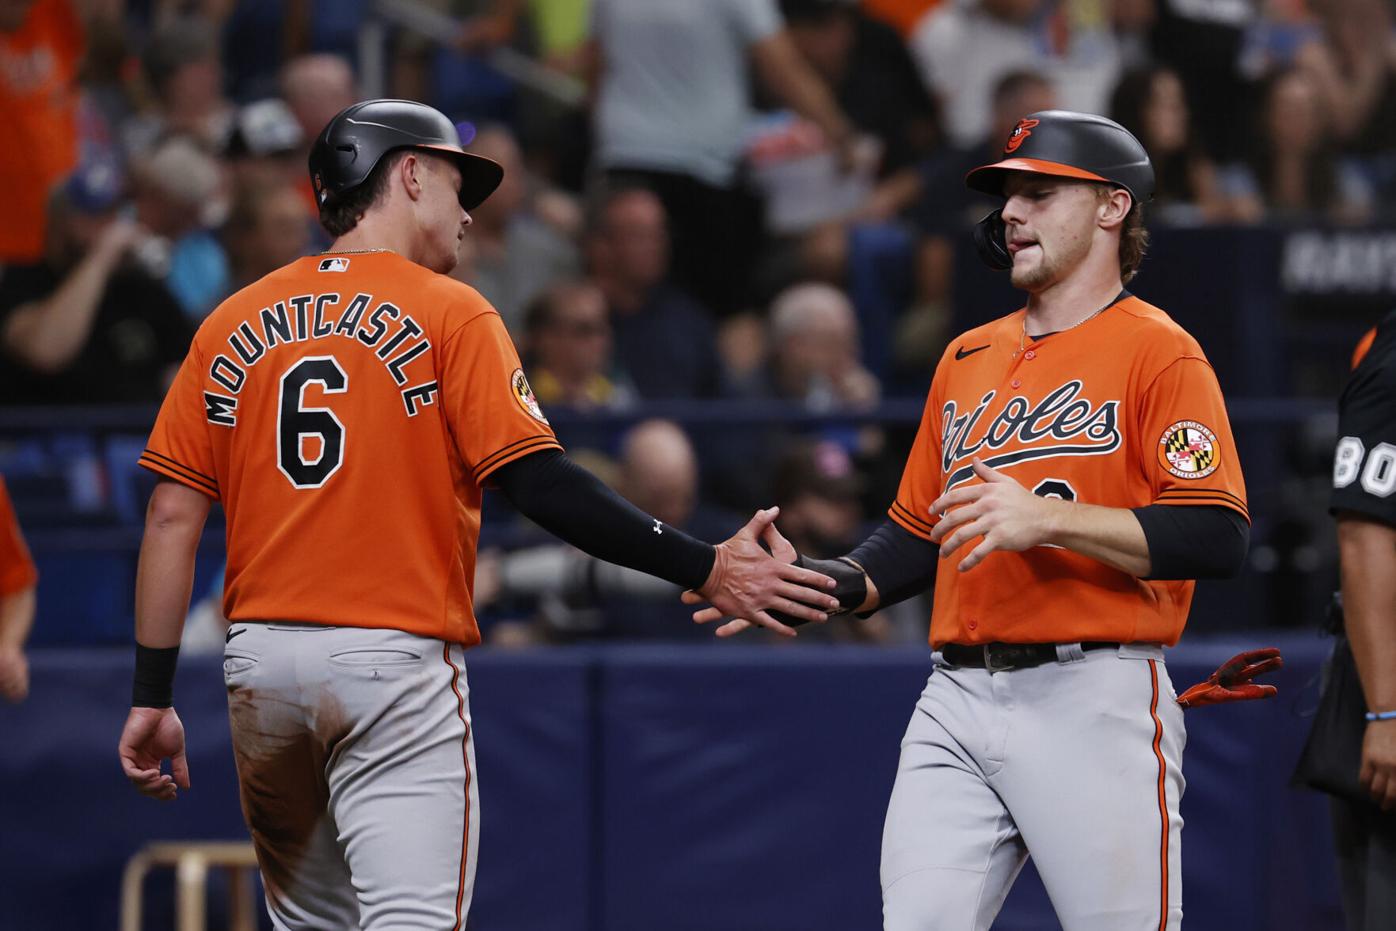 O'Hearn has pinch RBI single in 9th, Orioles beat Rays 6-5 after